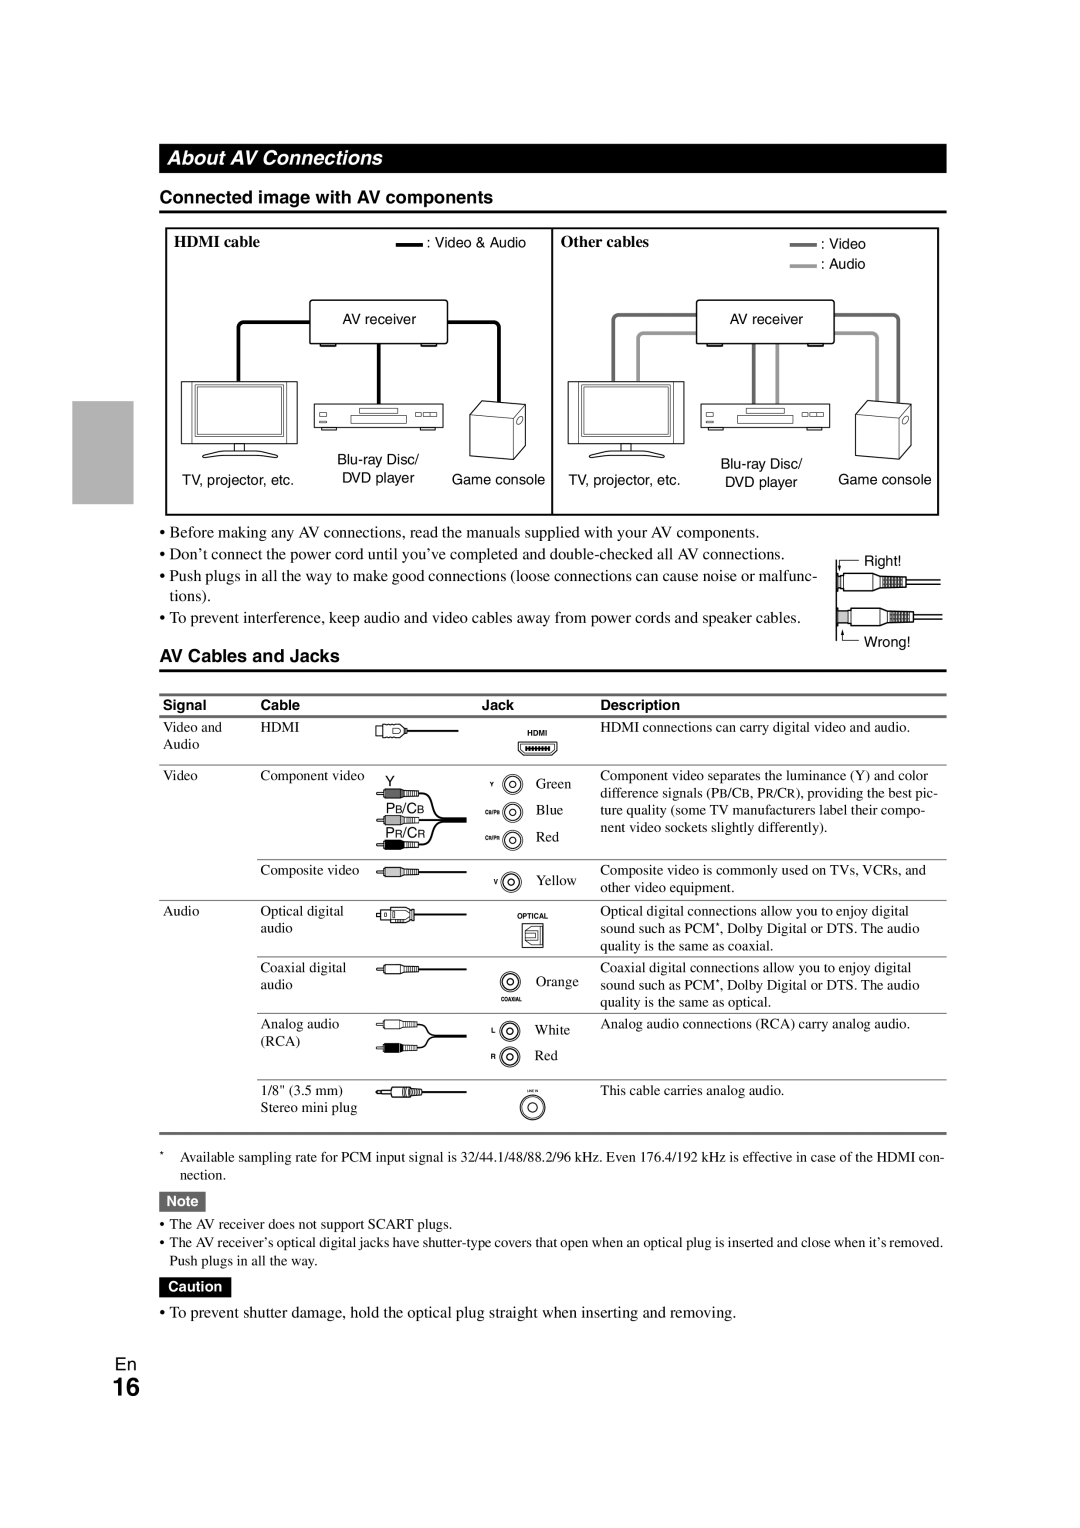 Onkyo SR608 instruction manual About AV Connections, Connected image with AV components, AV Cables and Jacks 